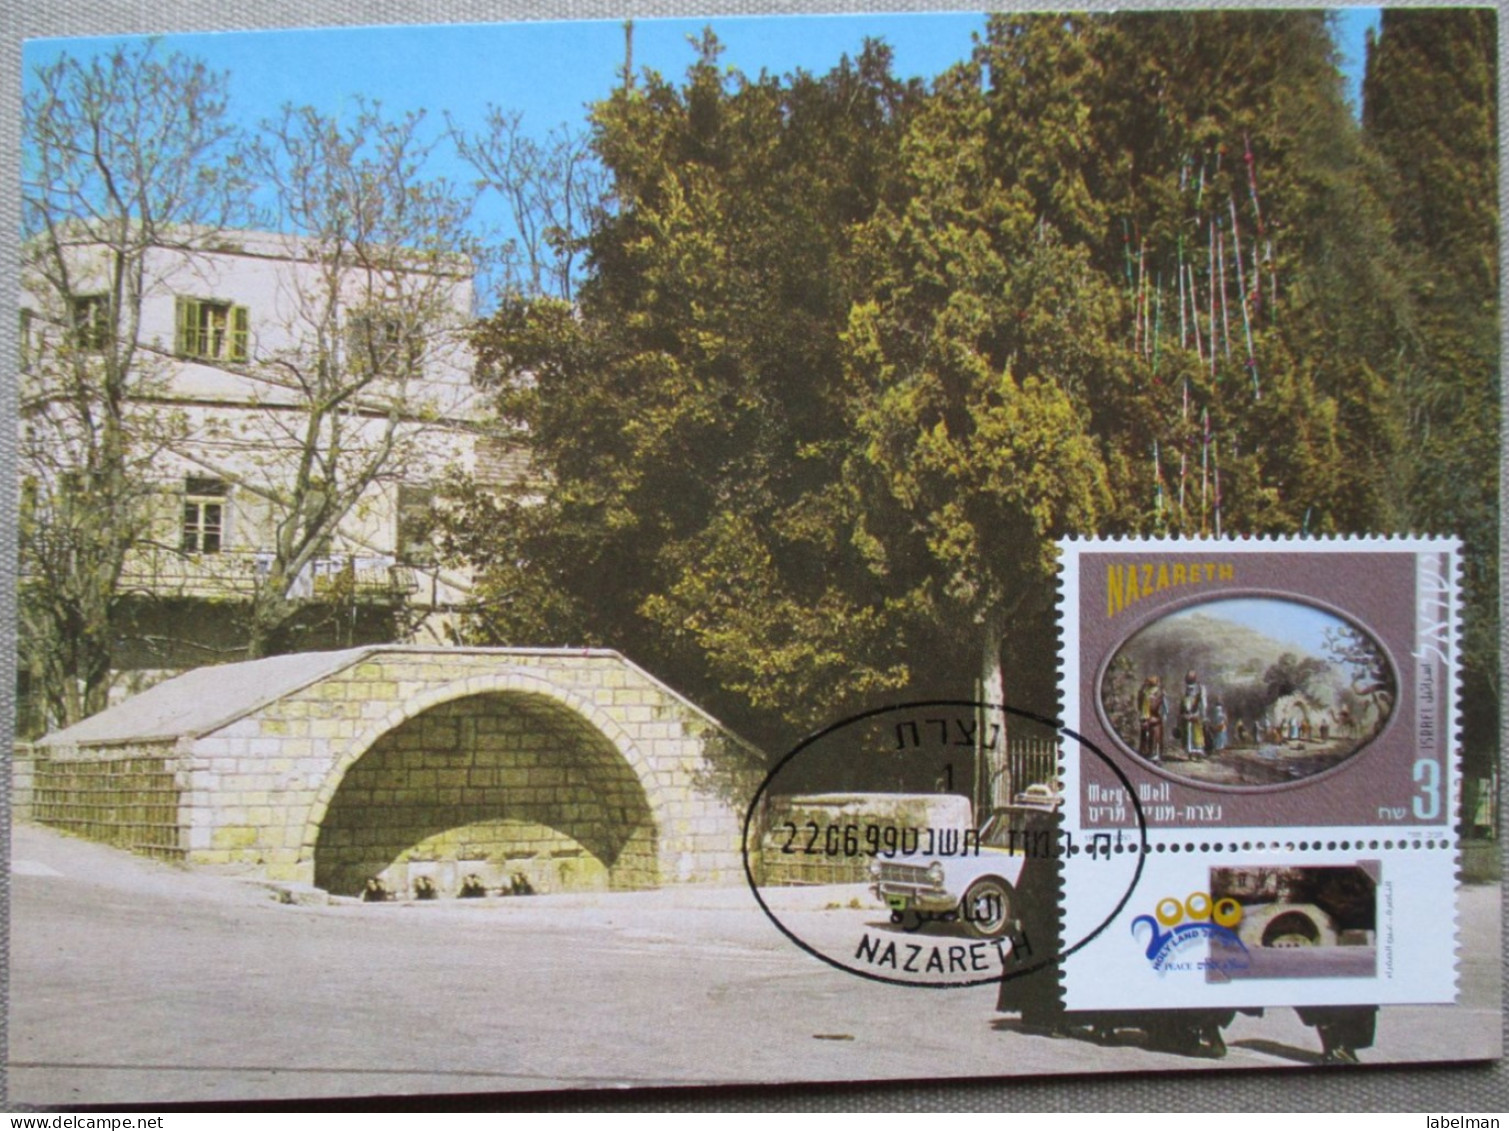 ISRAEL 1999 NAZARETH MARYS WELL PALPHOT MAXIMUM CARD STAMP FIRST DAY OF ISSUE POSTCARD CARTE POSTALE POSTKARTE - Maximum Cards